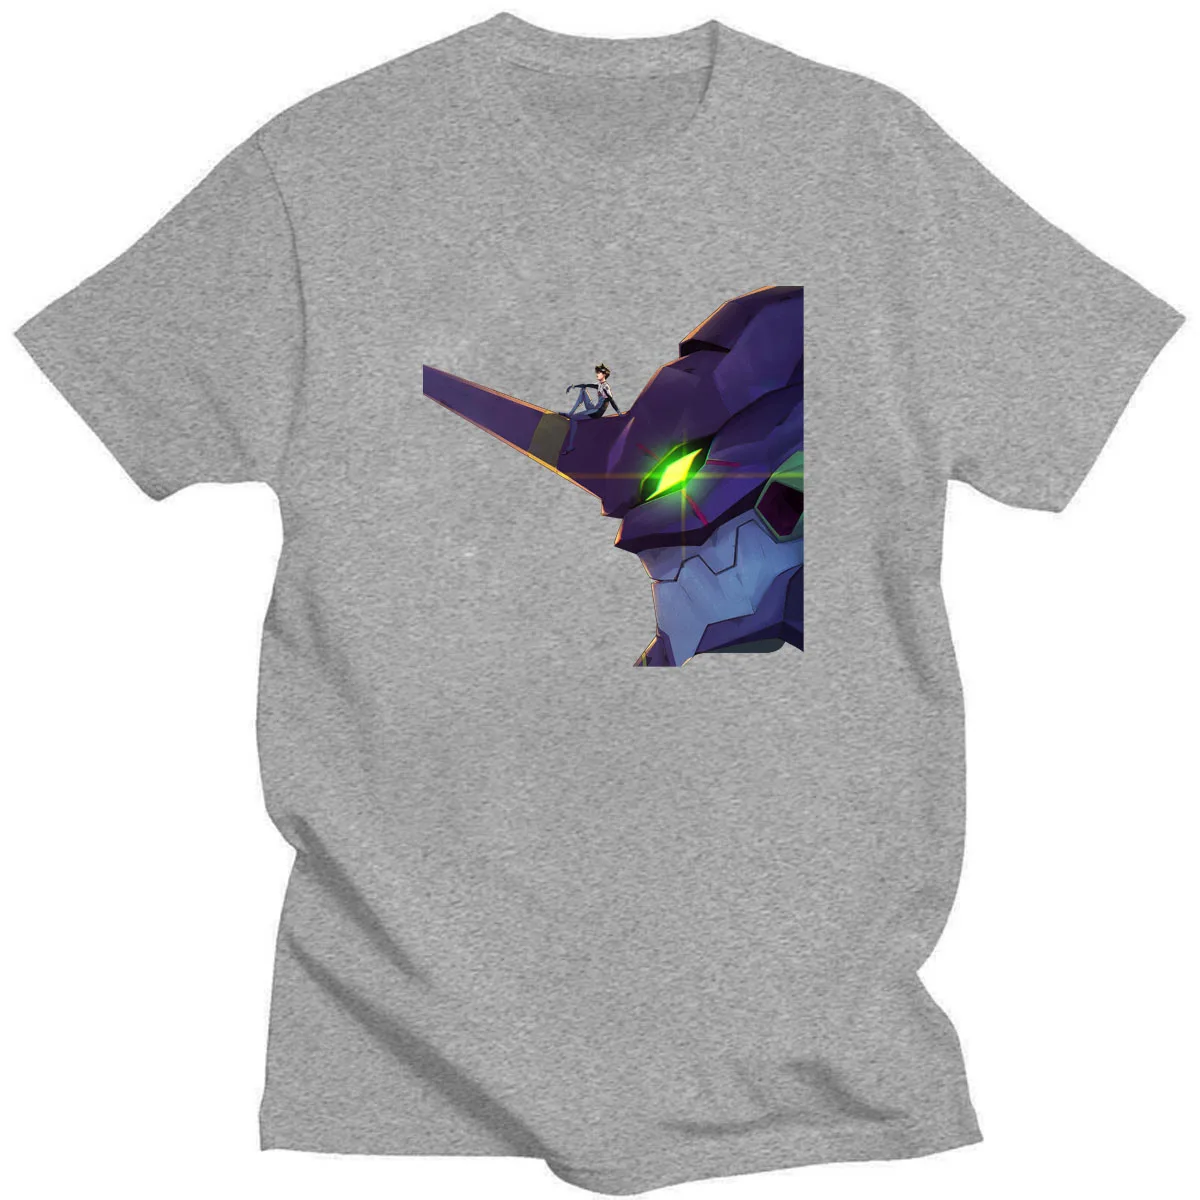 

Hot Anime Evangelion EVA01 Art Print T-shirts Summer Casual Short Sleeve O-neck Cotton Top Tees Fashion Cosplay Shirts For Fans